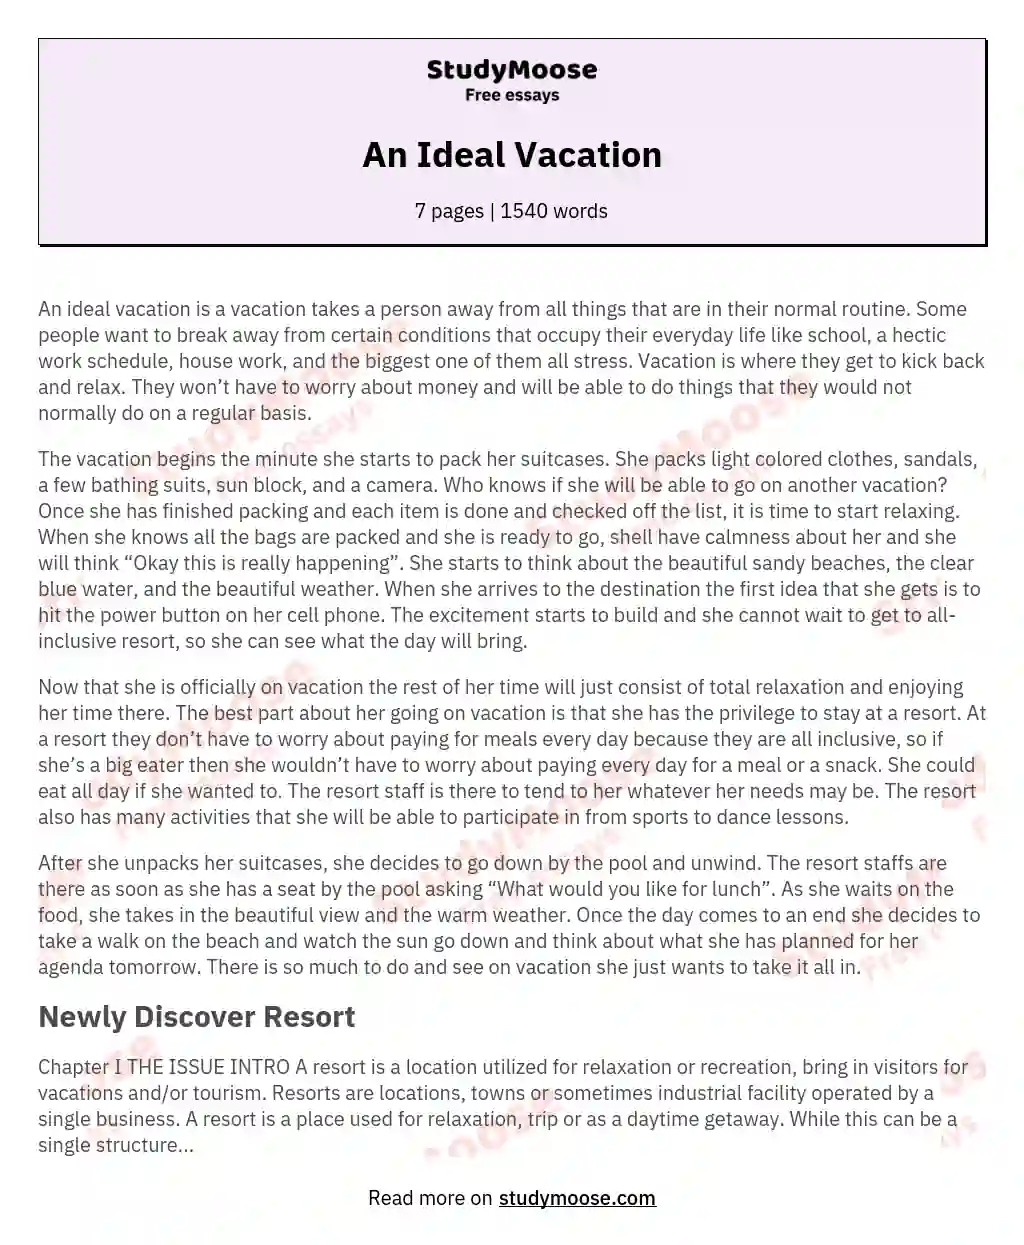 An Ideal Vacation essay